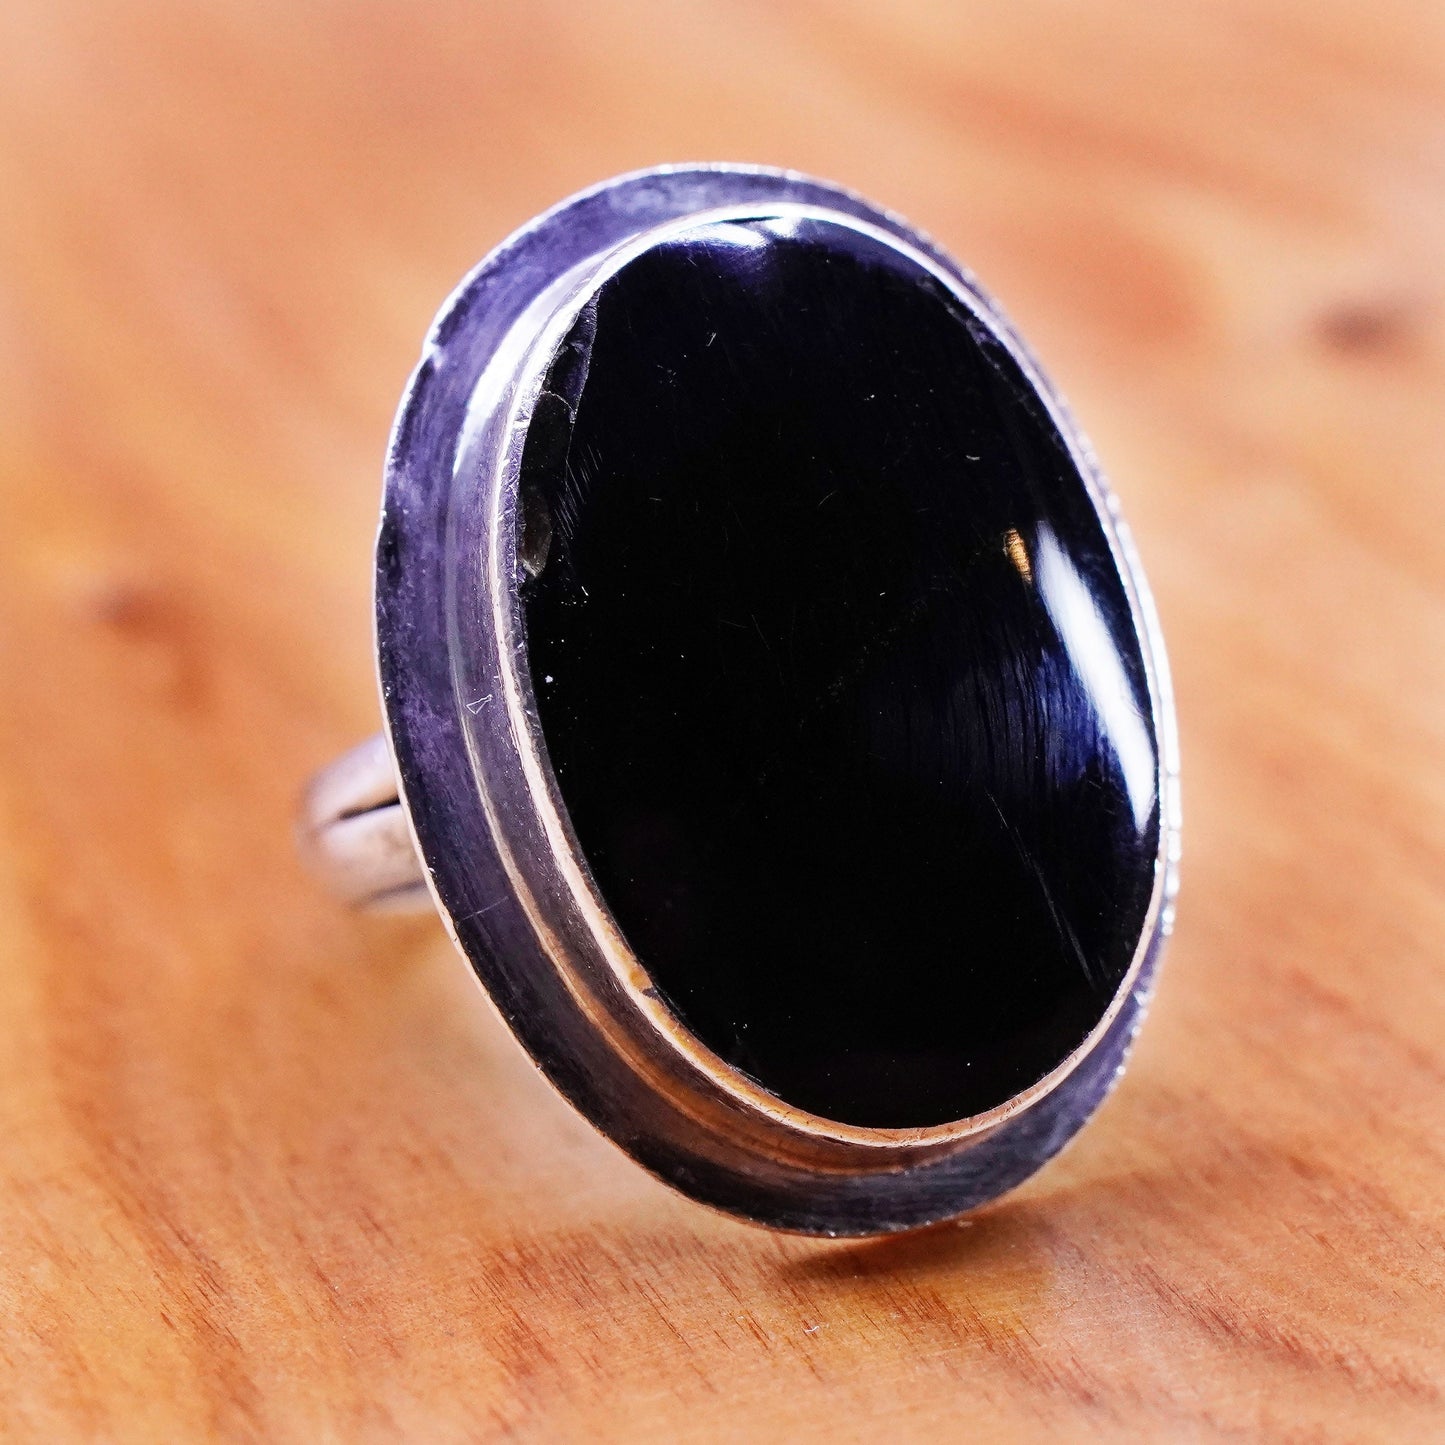 Size 8, vintage Mexico Sterling 925 silver handmade ring with oval onyx